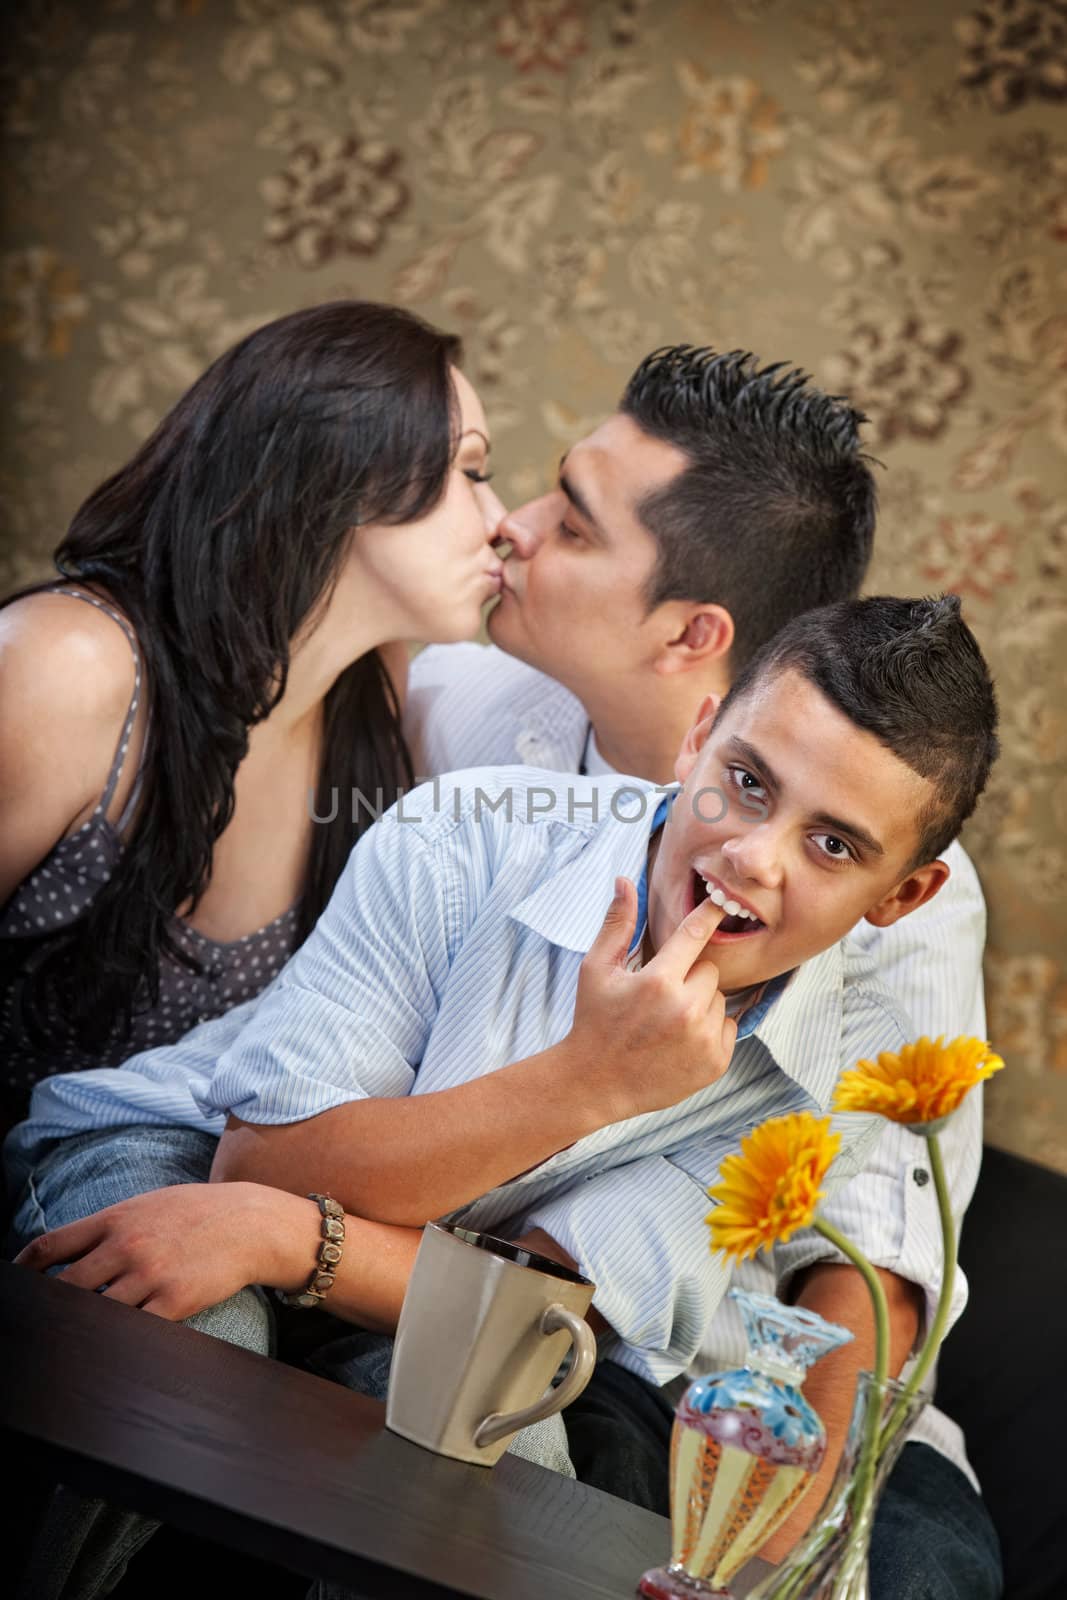 Grossed out child in front of kissing parents